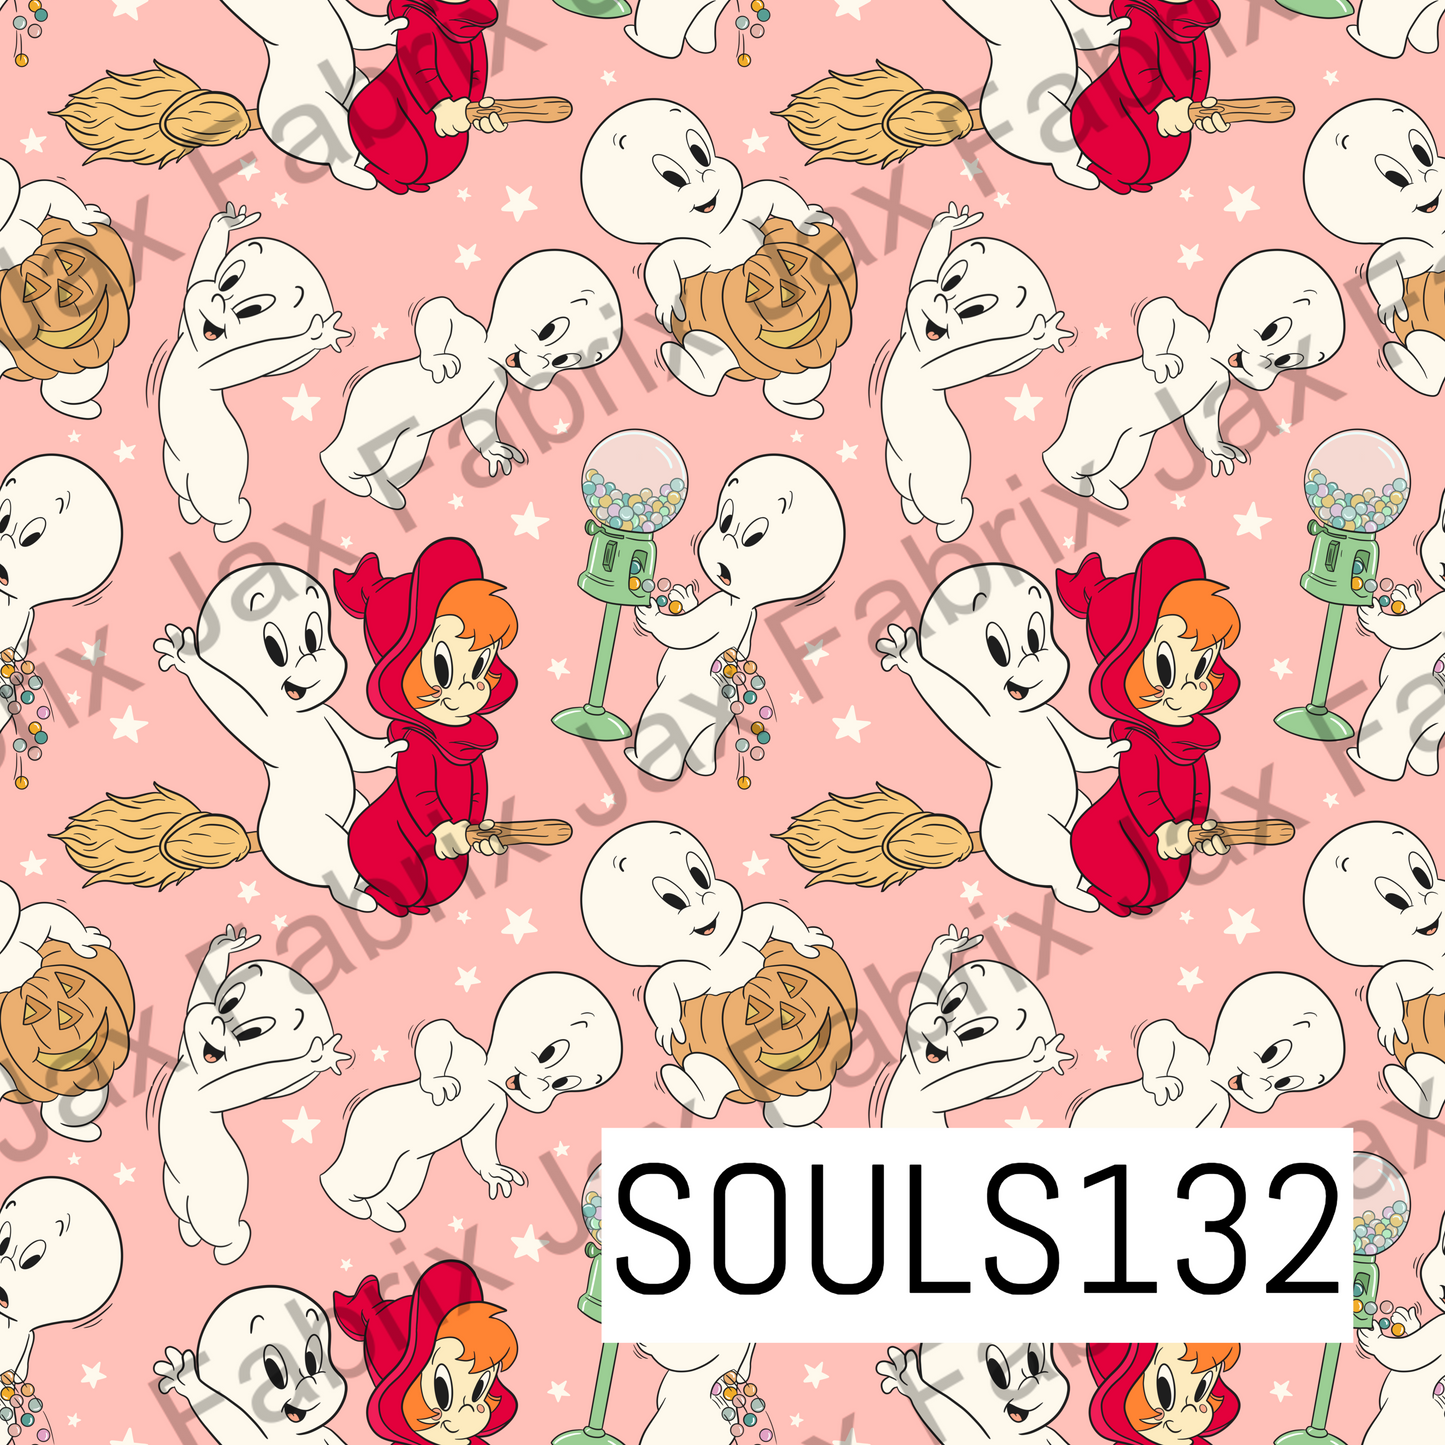 Ghost Pink SOULS132